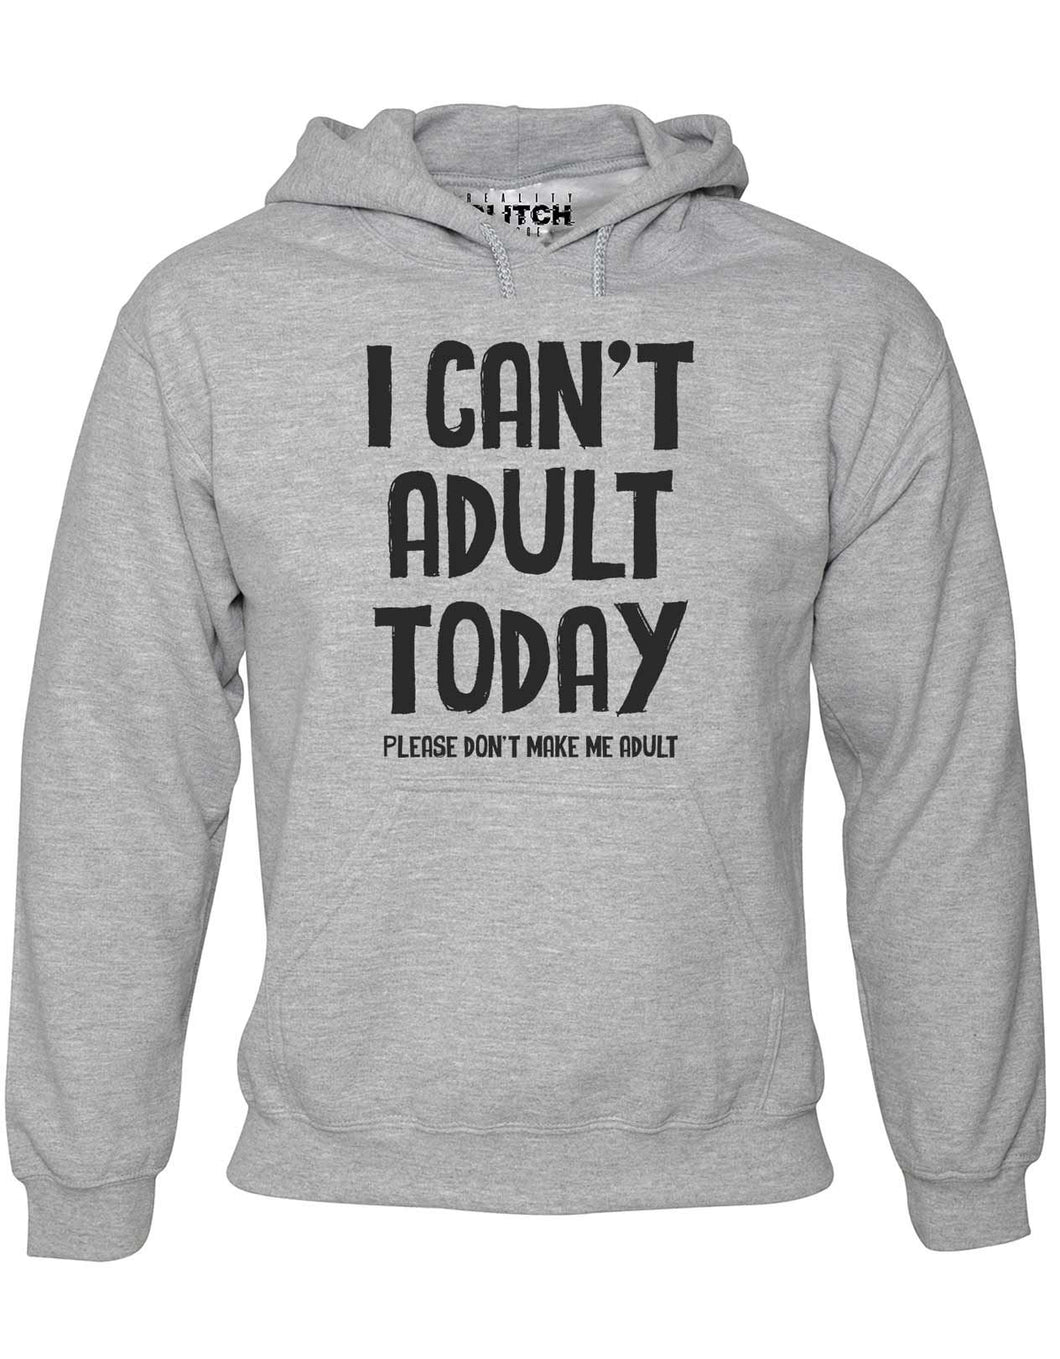 I Can't Adult Today Mens Hoodie